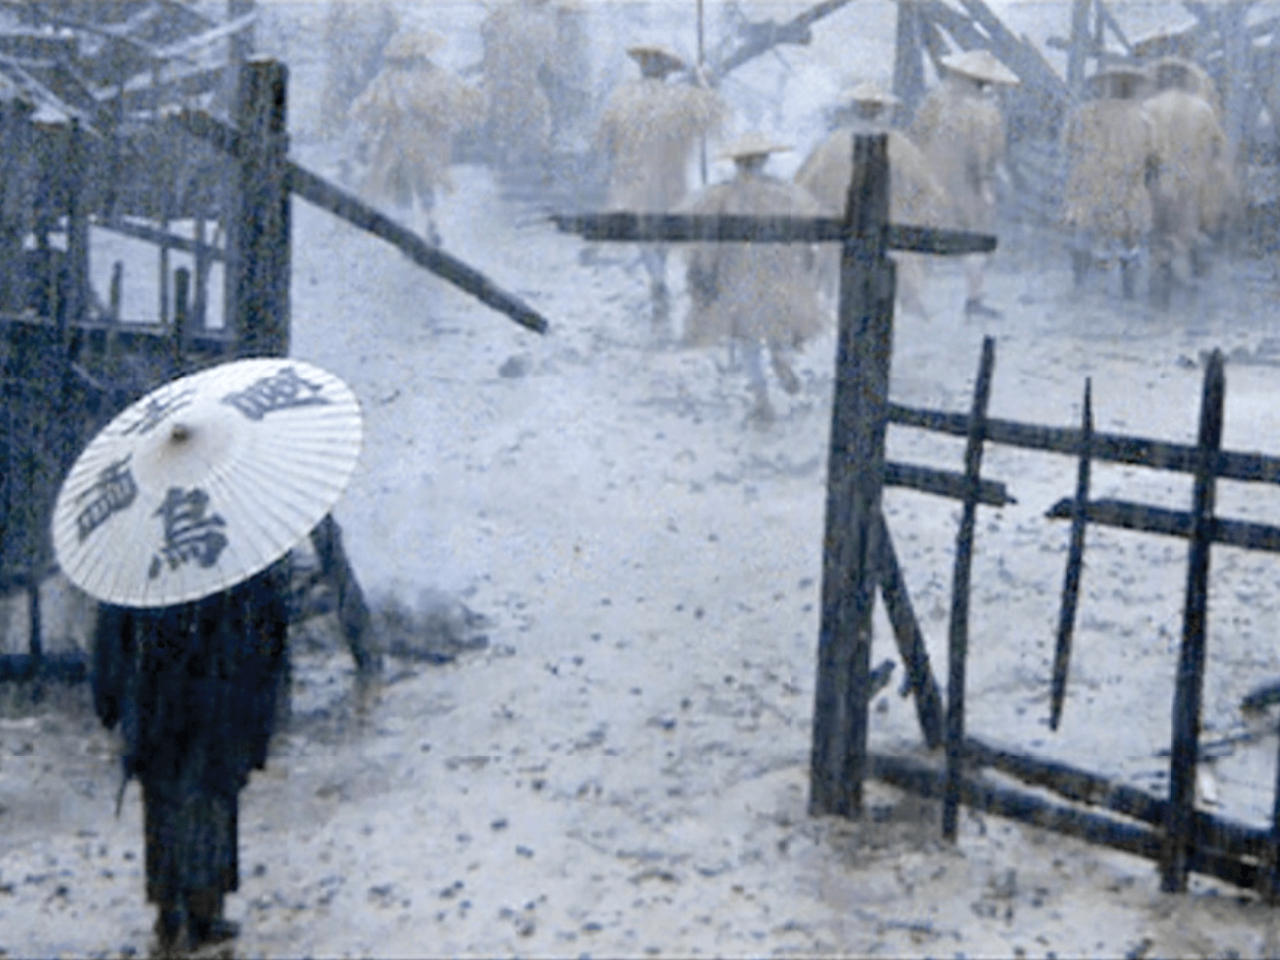 In a film still, a figure holds a white umbrella that is painted with calligraphic characters in black ink. They stand in the snow, in front of a broken fence. On the other side of the fence are several human figures dressed identically in dull yellow clothing and hats. 